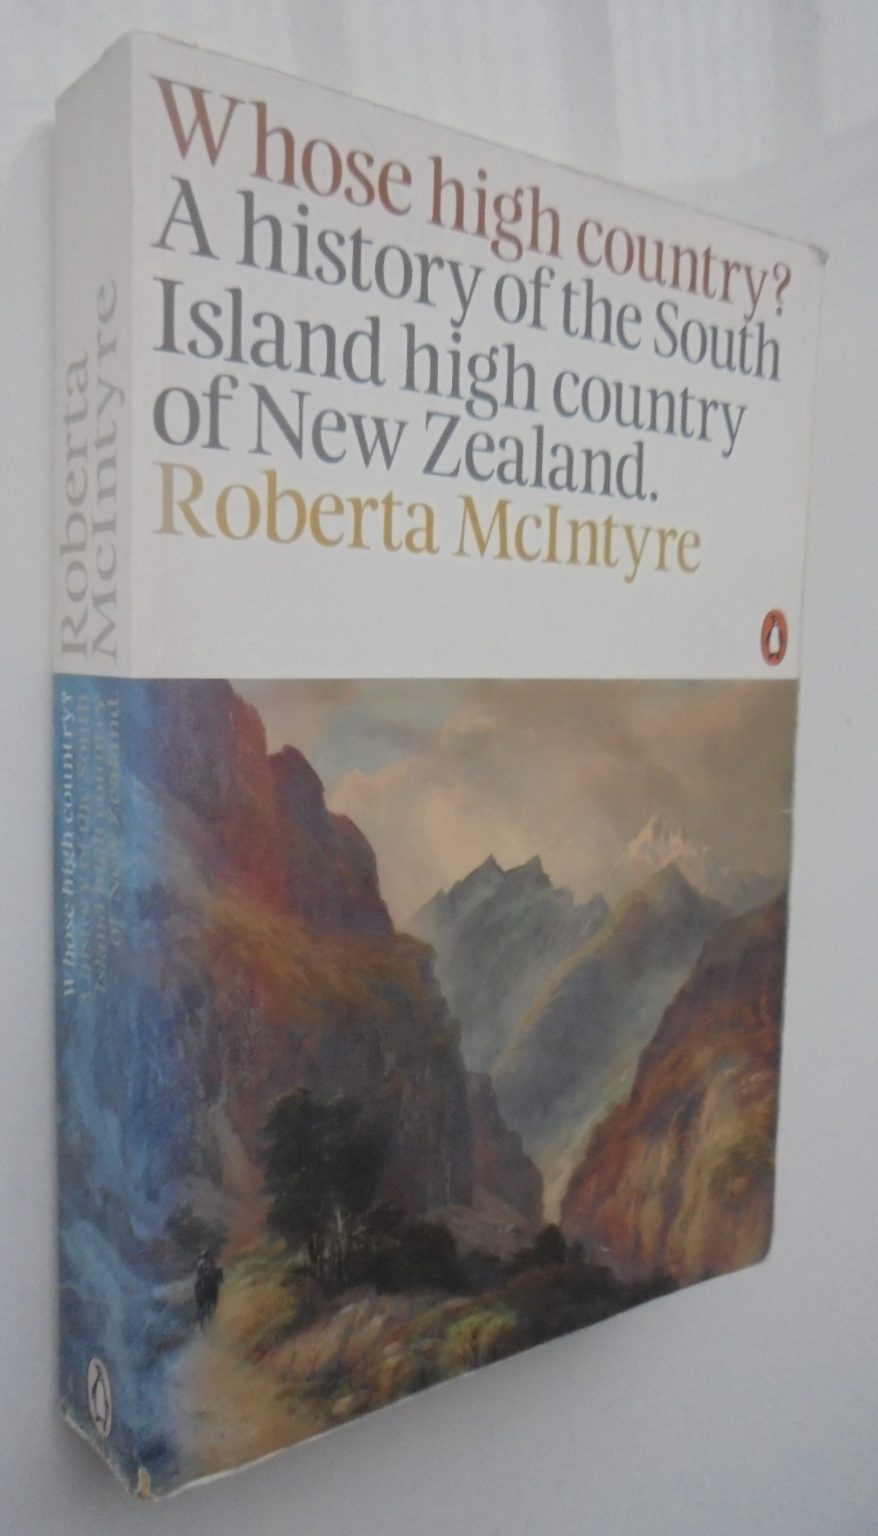 Whose High Country? A History of the South Island High Country of New Zealand by Roberta McIntyre.